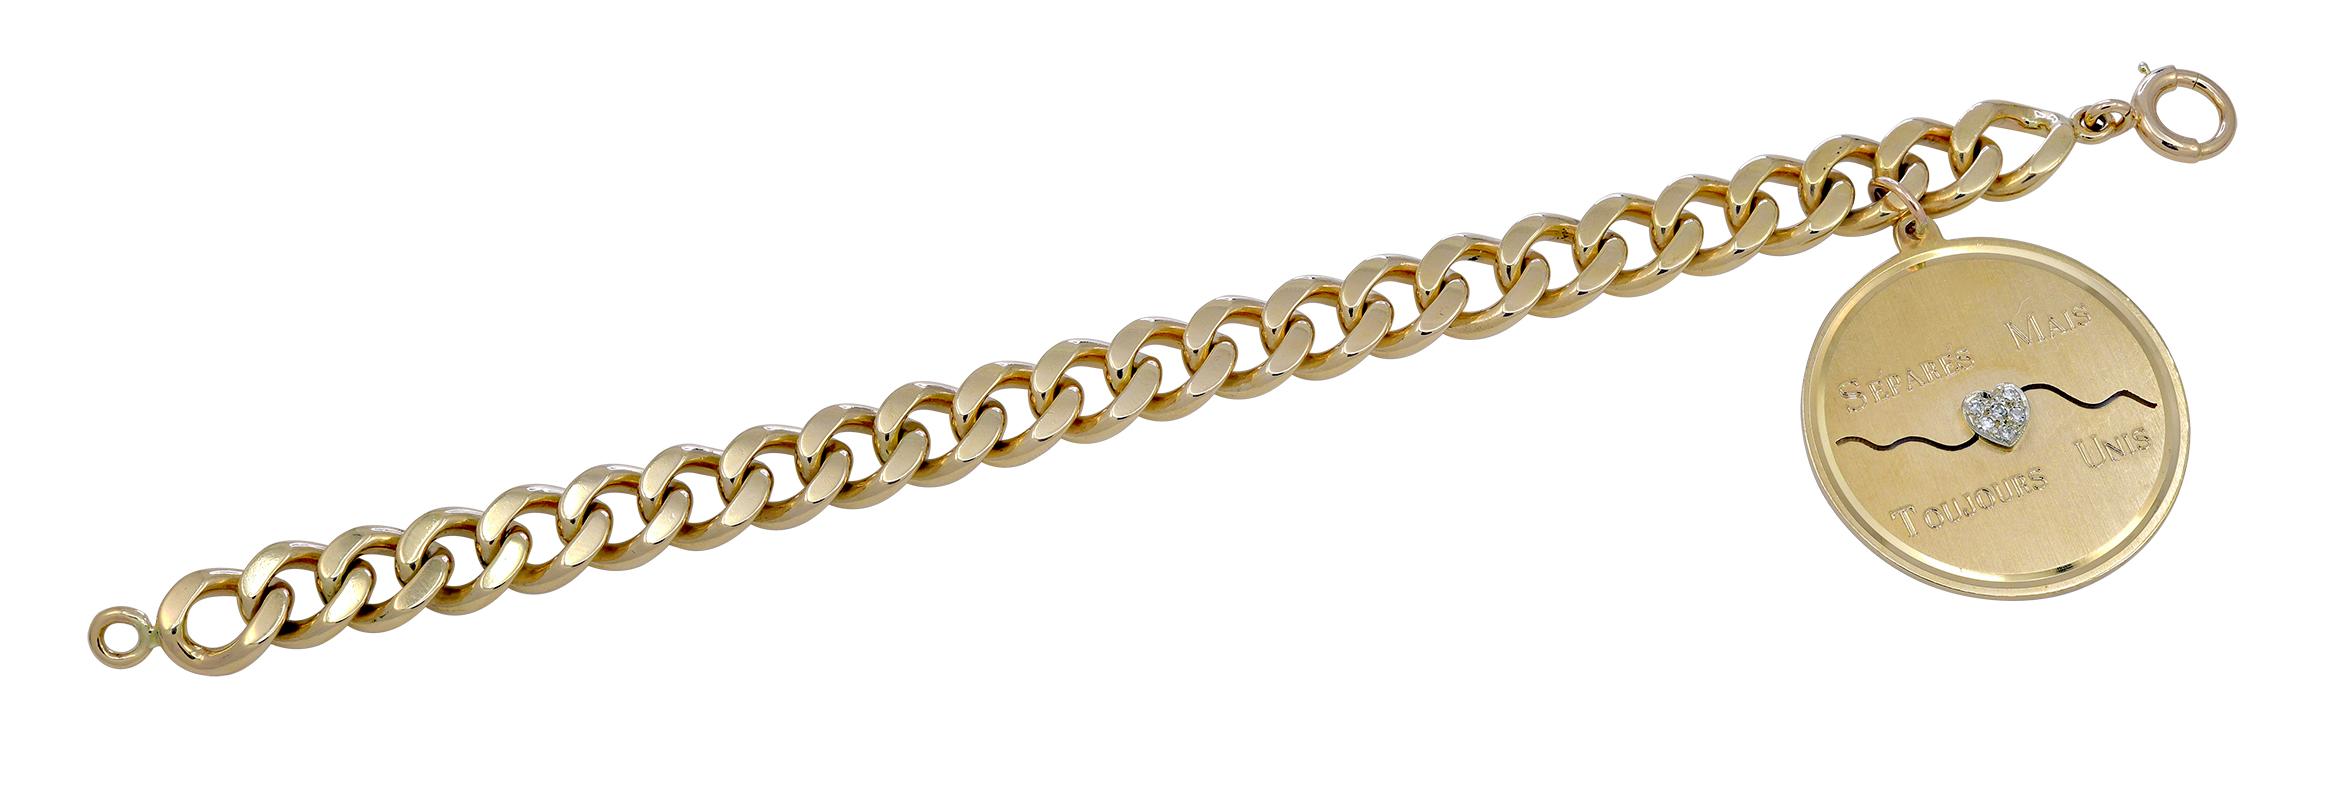 Separes Mais Toujours Unis Gold Charm Bracelet In Excellent Condition For Sale In New York, NY